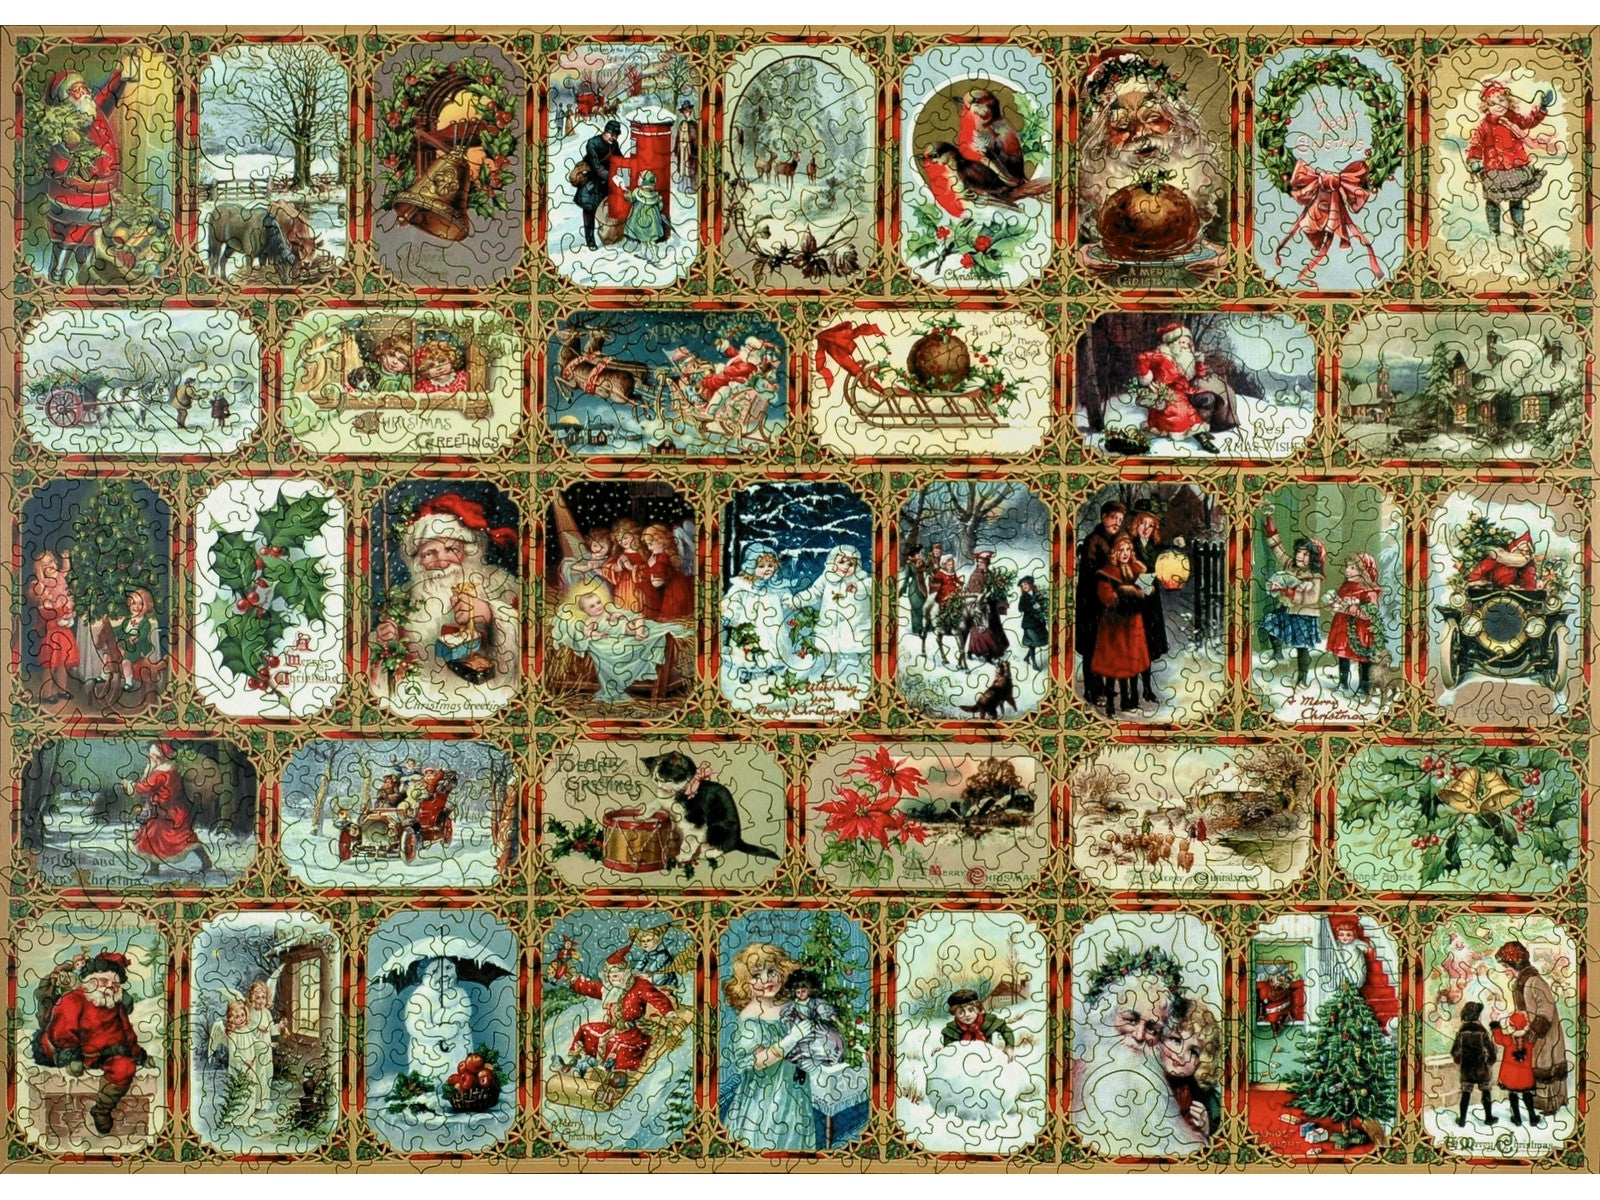 The front of the puzzle, Yuletide Memories, which shows a collage of vintage christmas postcards with decorative borders.